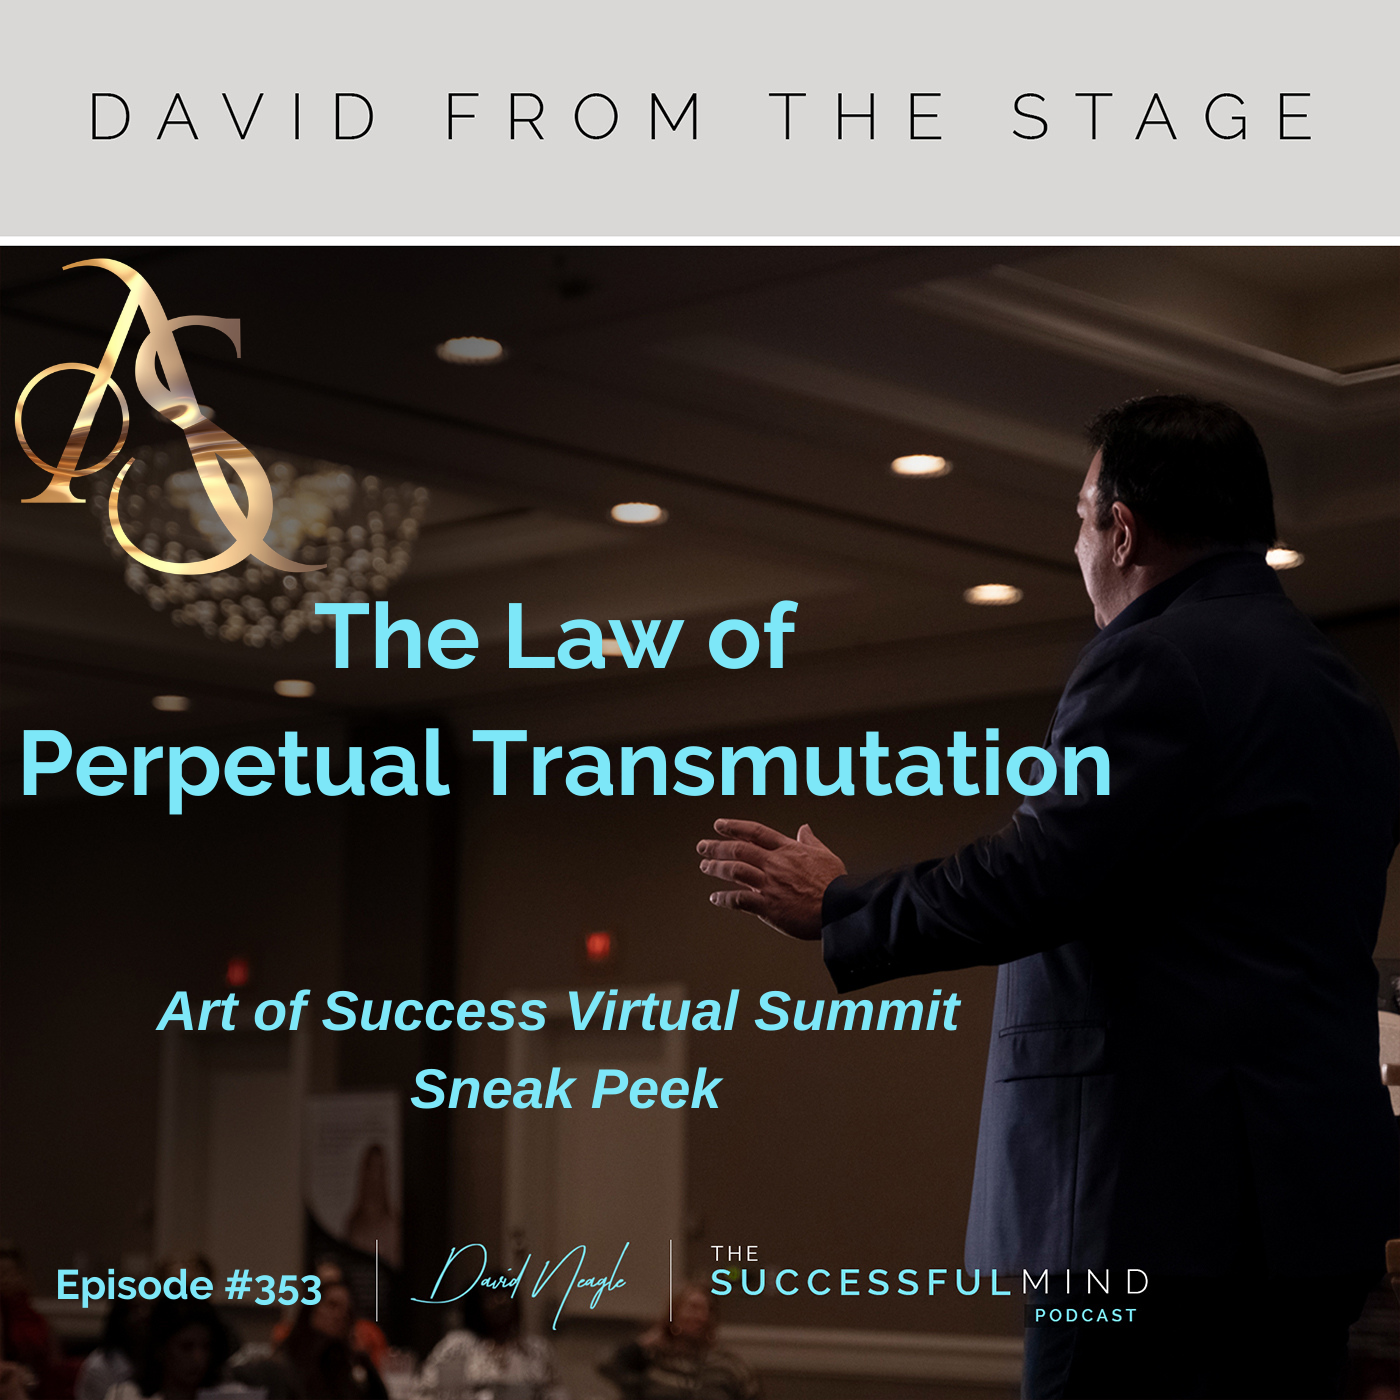 The Successful Mind Podcast - Episode 353 - AOSS Sneak Peek: The Law of Perpetual Transmutation